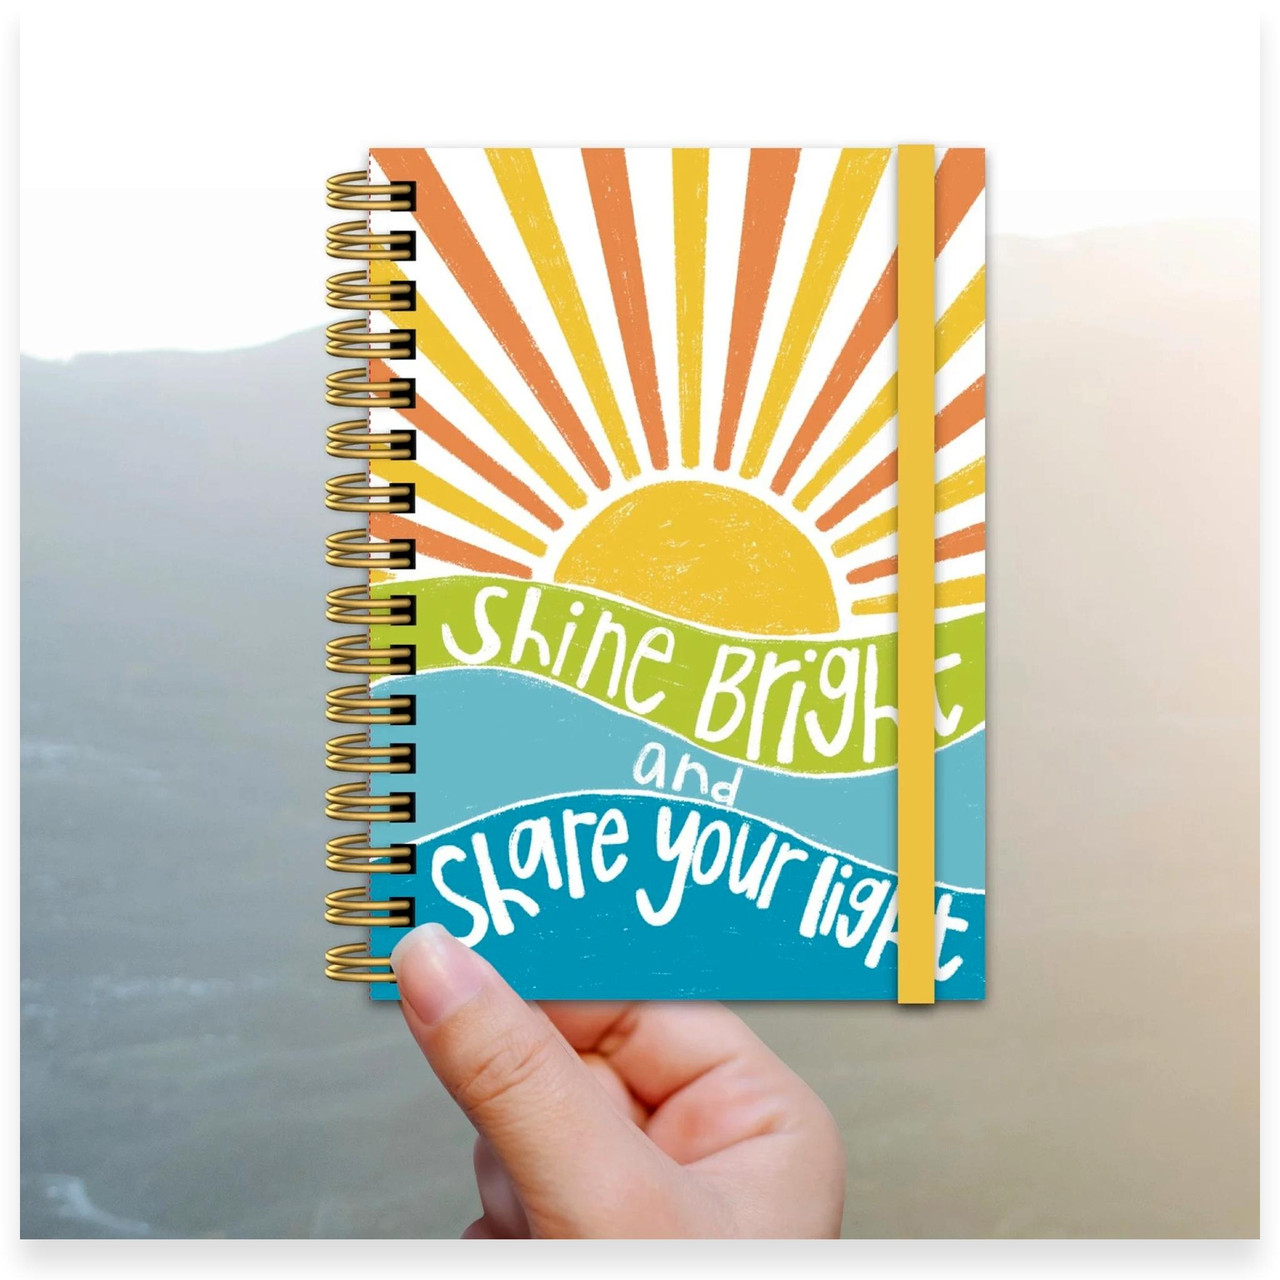 Shine Bright and Share Your Light (Journal)